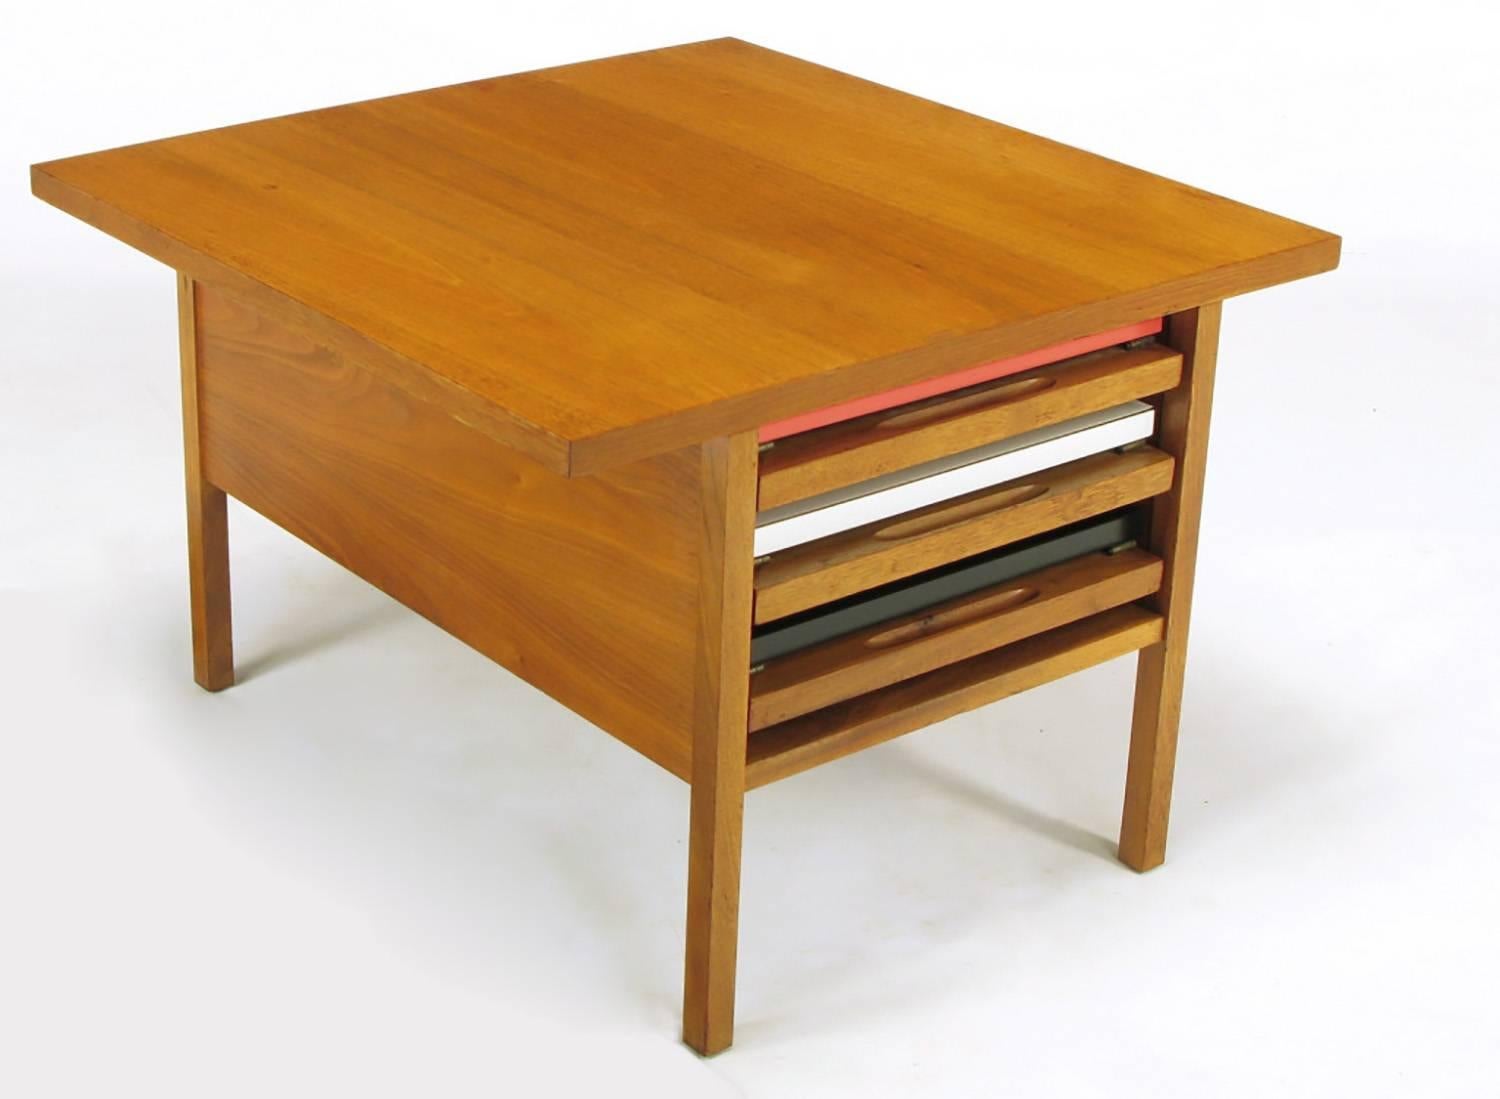 Rare coffee table with internal folding snack tables by John Keal for Brown Saltman. Bleached walnut wood square top coffee table with three internal side or snack tables. Each table has collapsible bleached walnut sides that fold underneath the